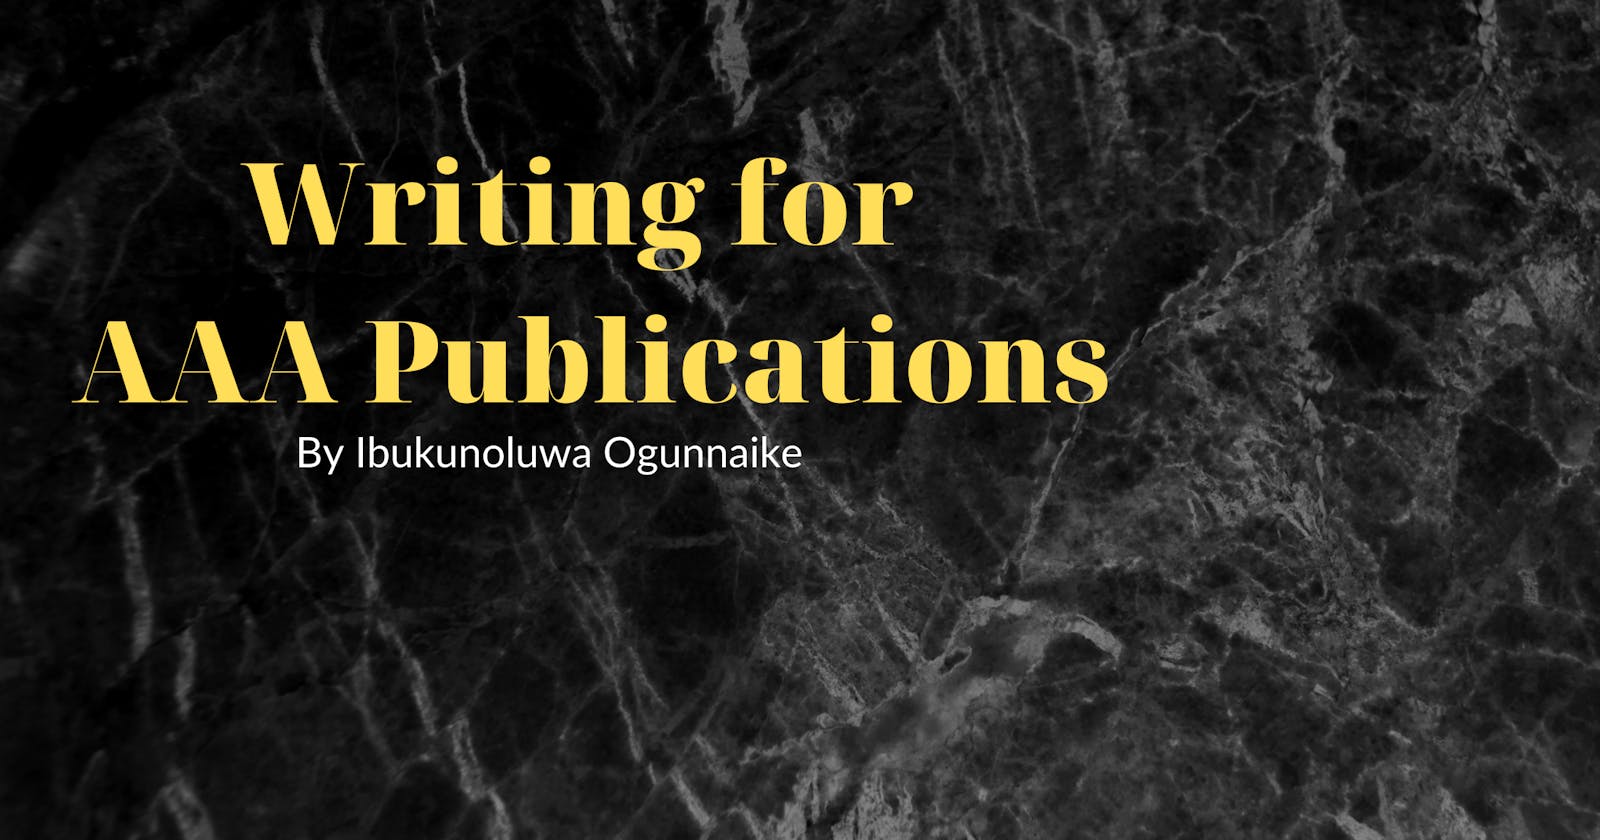 Writing for AAA Publications